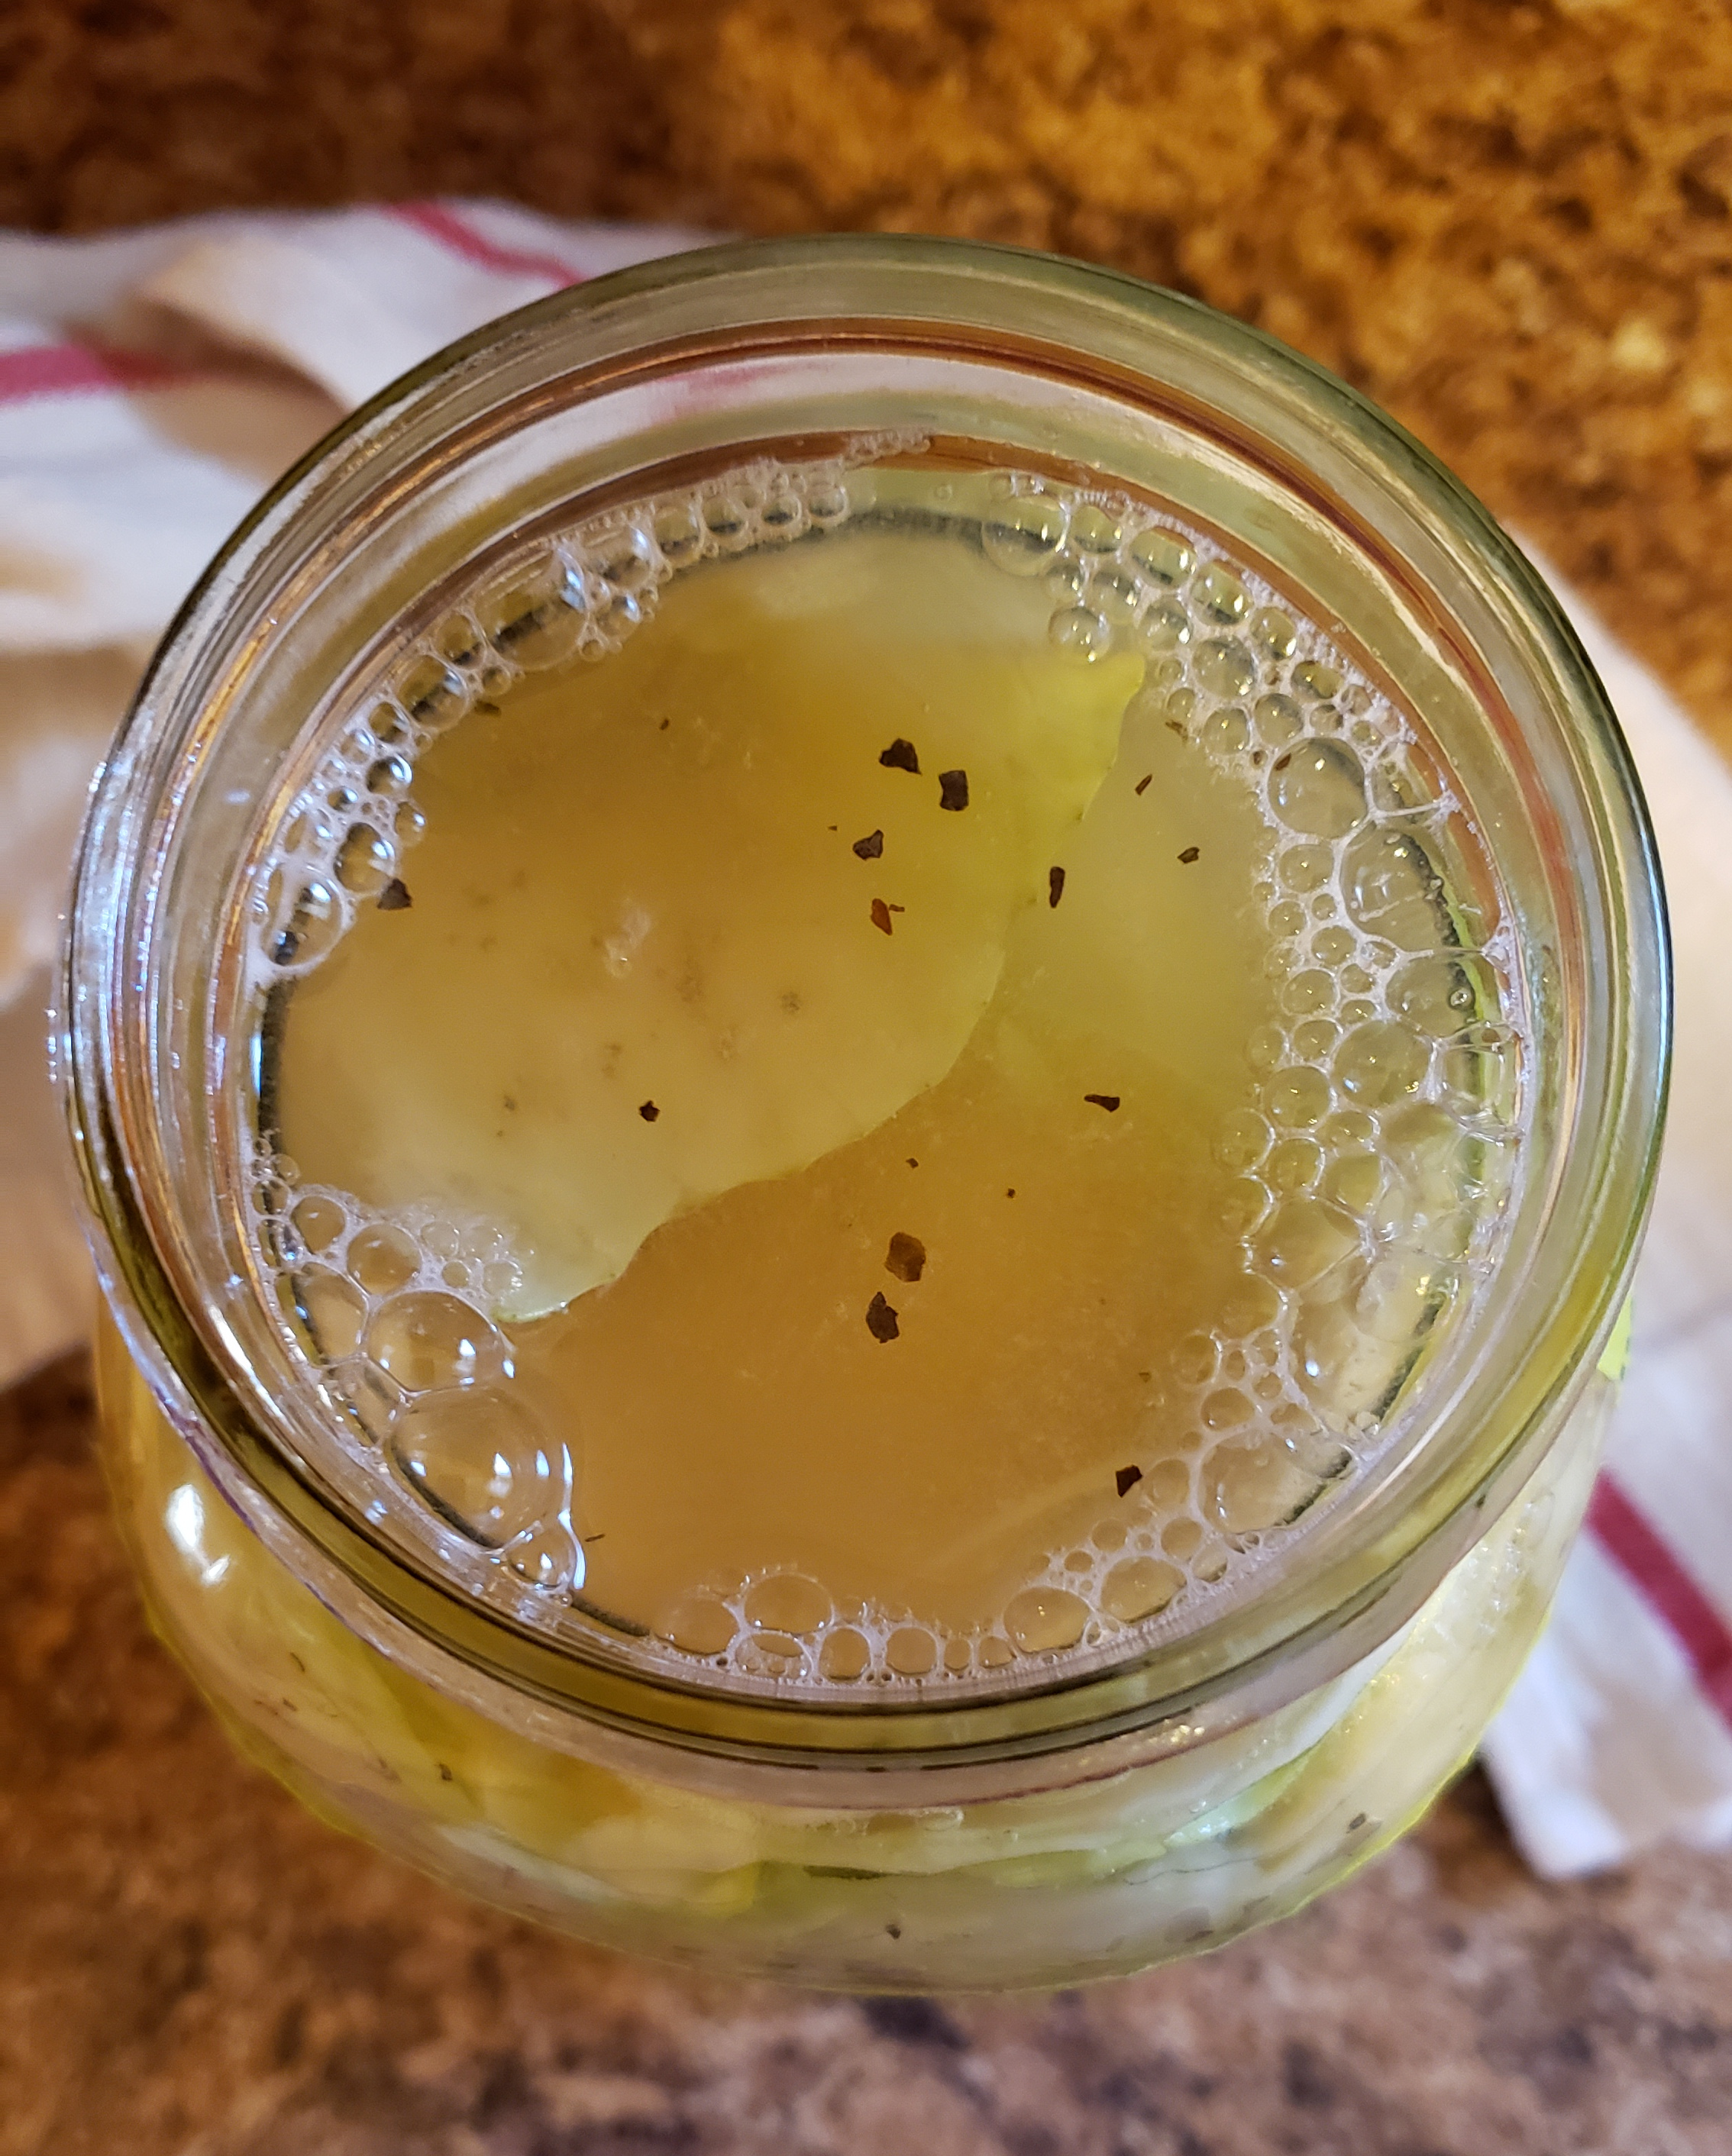 A top down view of the jar without the lid on. The water level is near the top 
      and there are bubbles on the surface.